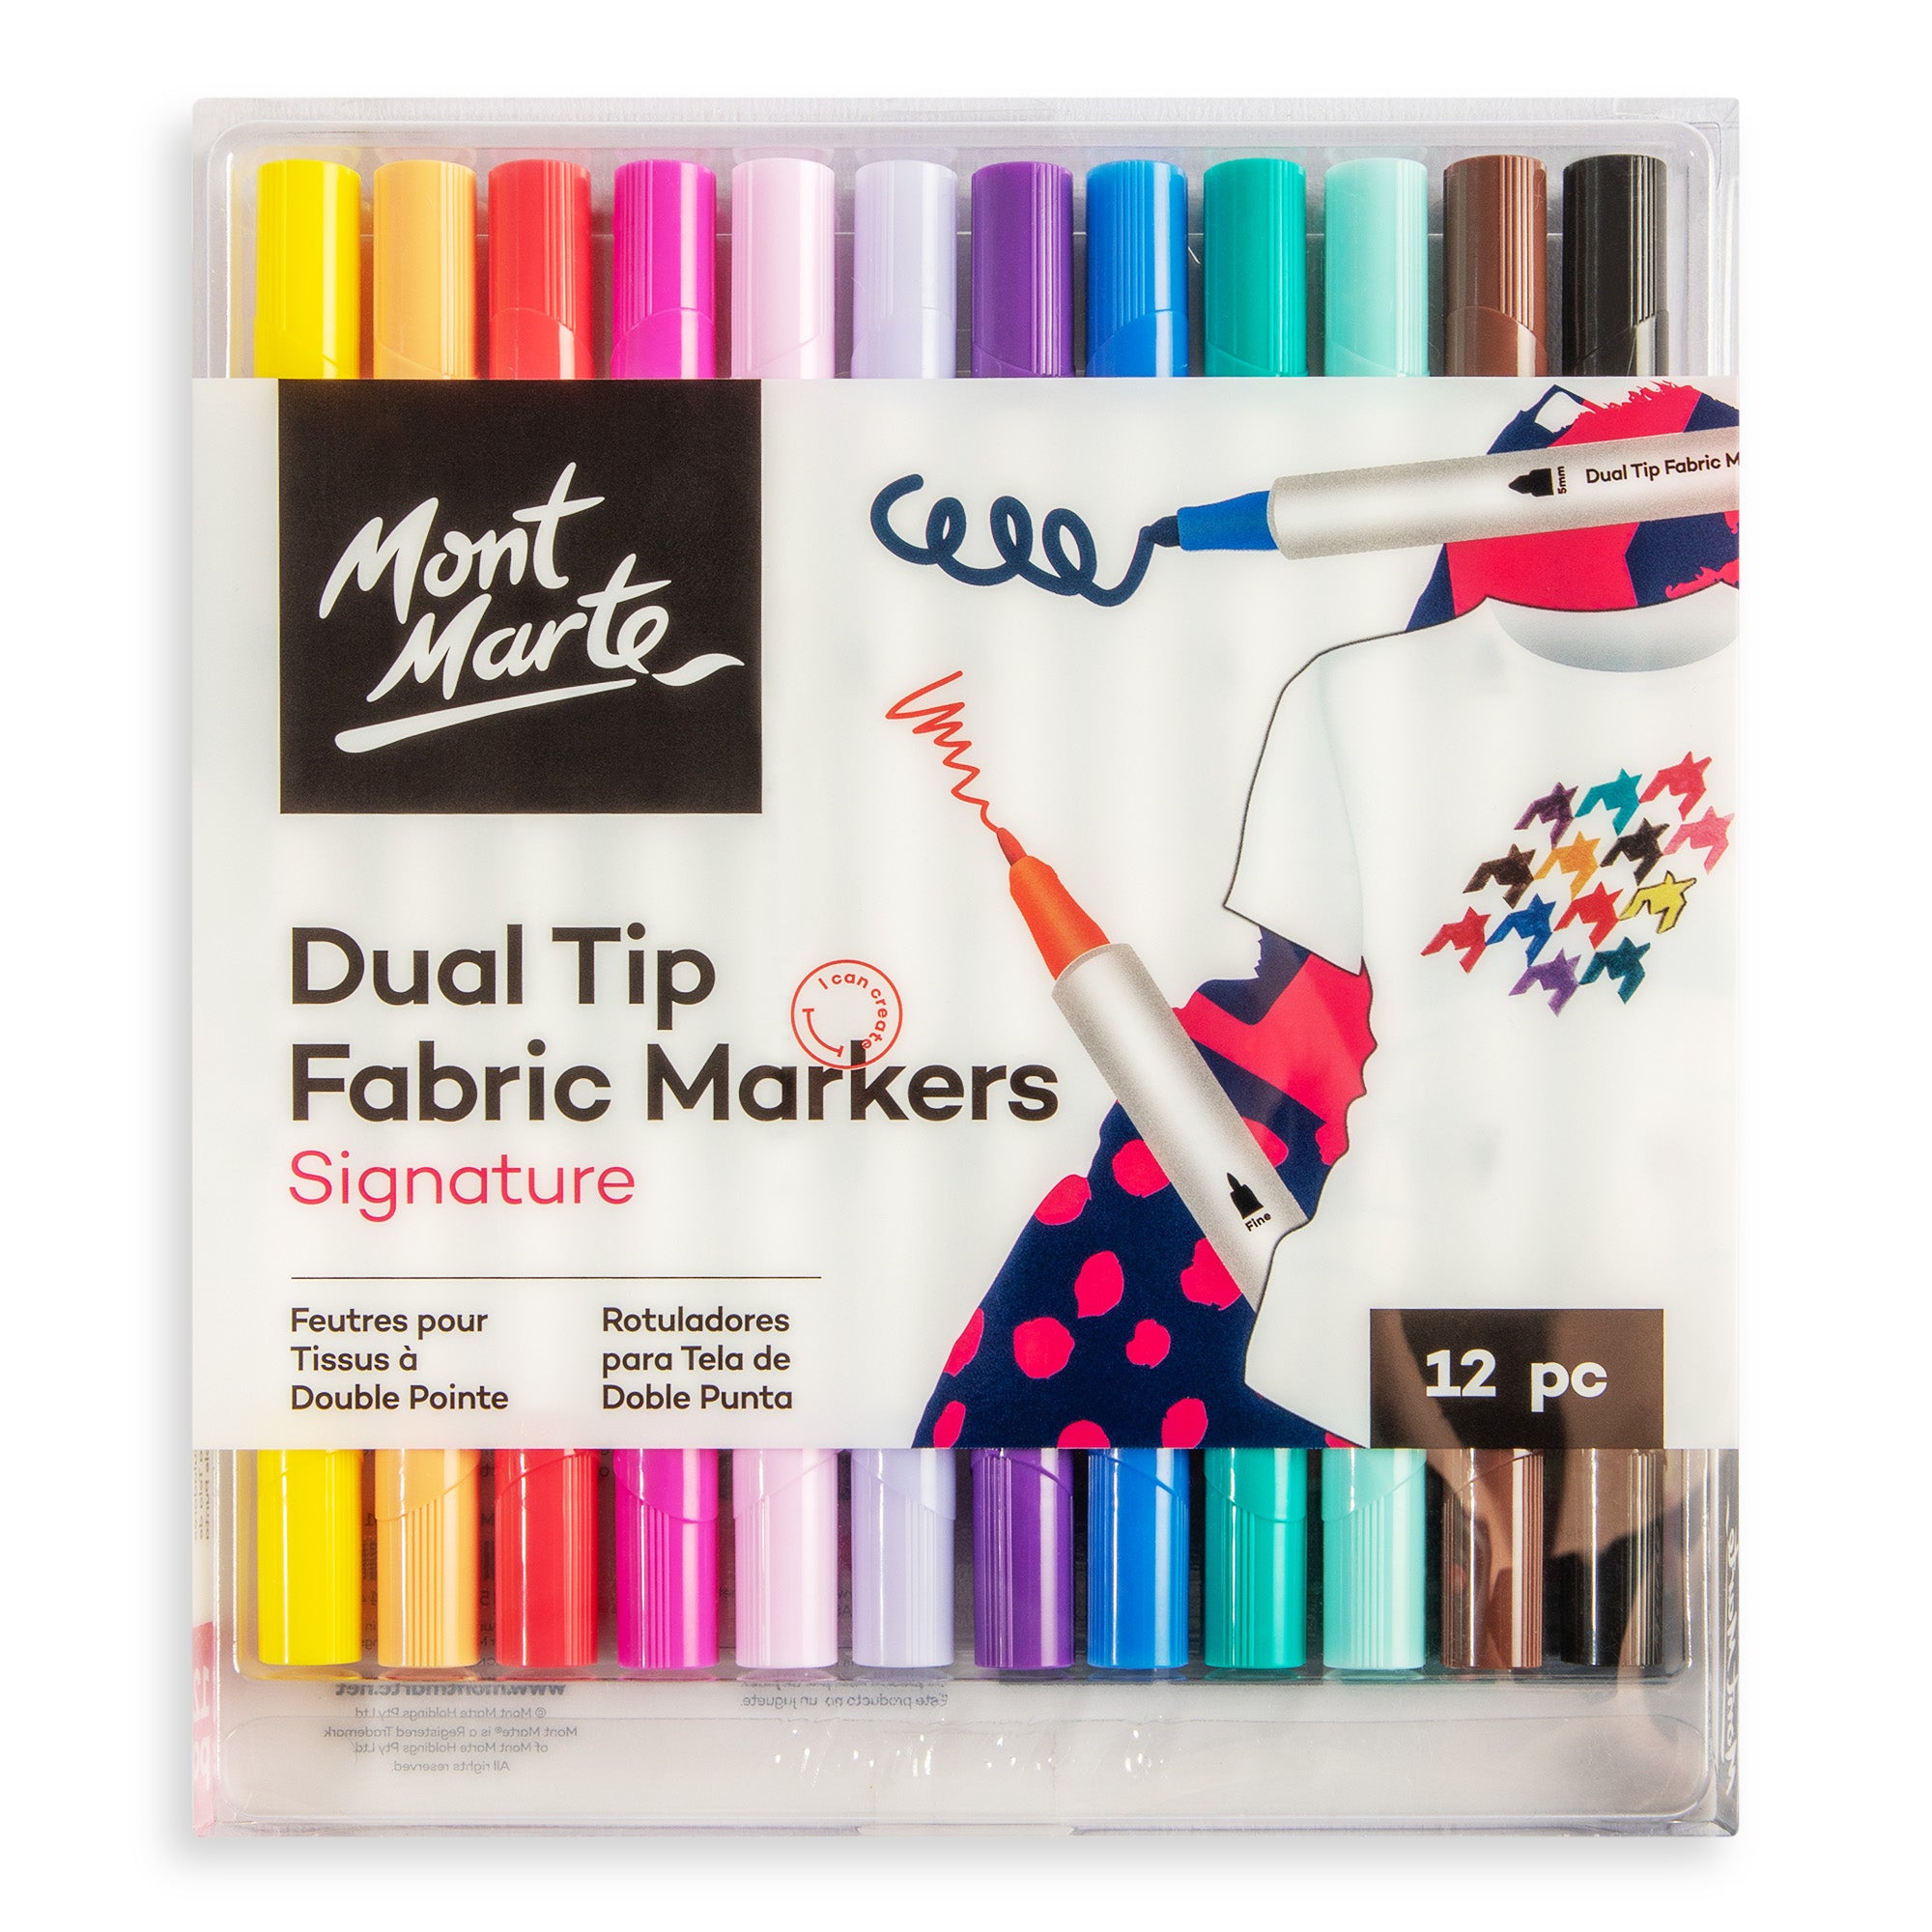 Mont Marte Dual Tip Fabric Markers - Dollars and Sense